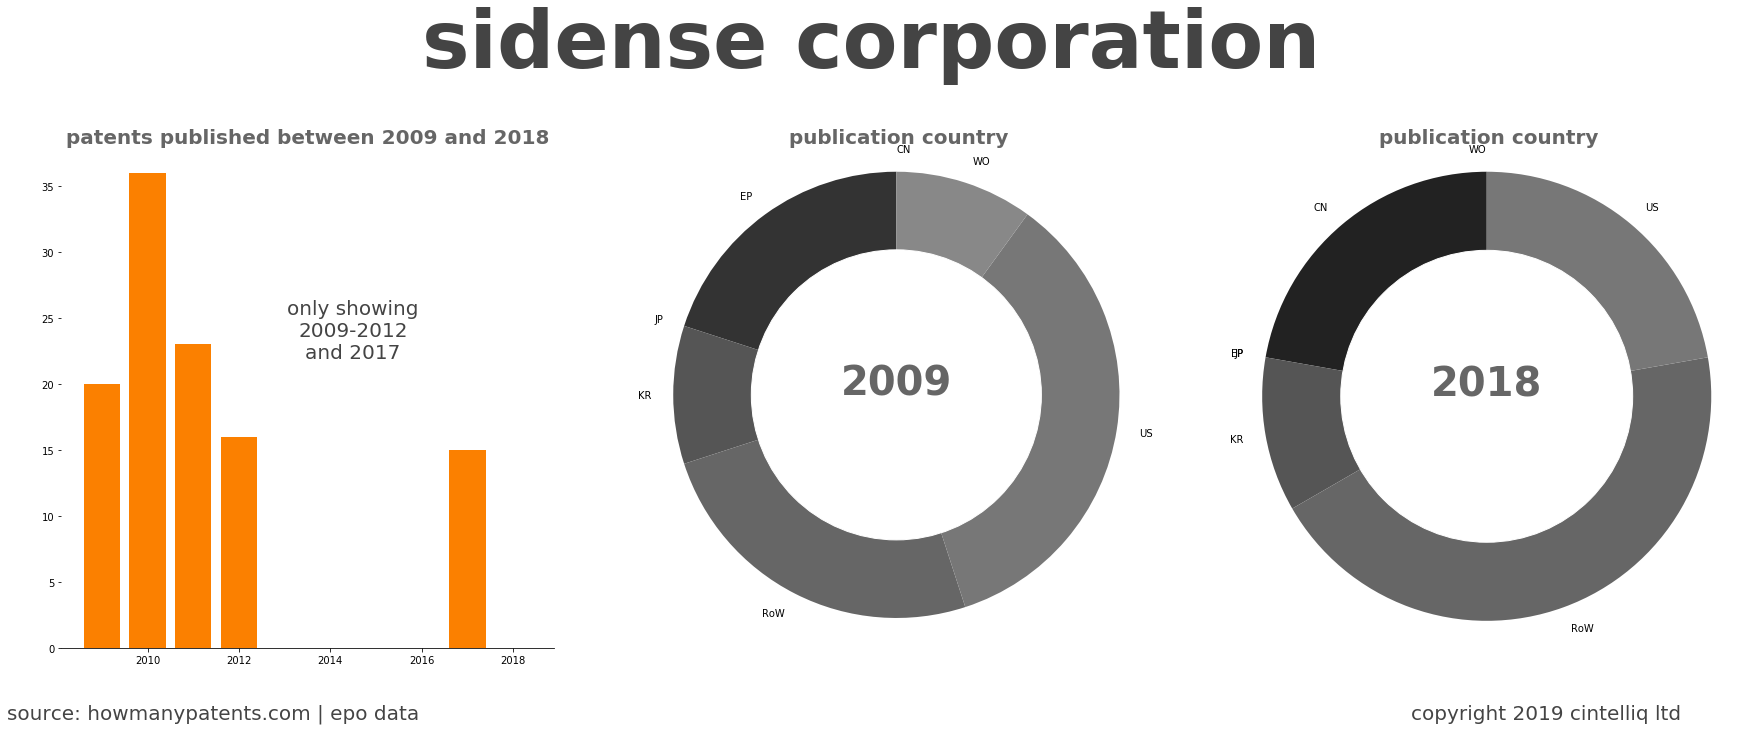 summary of patents for Sidense Corporation